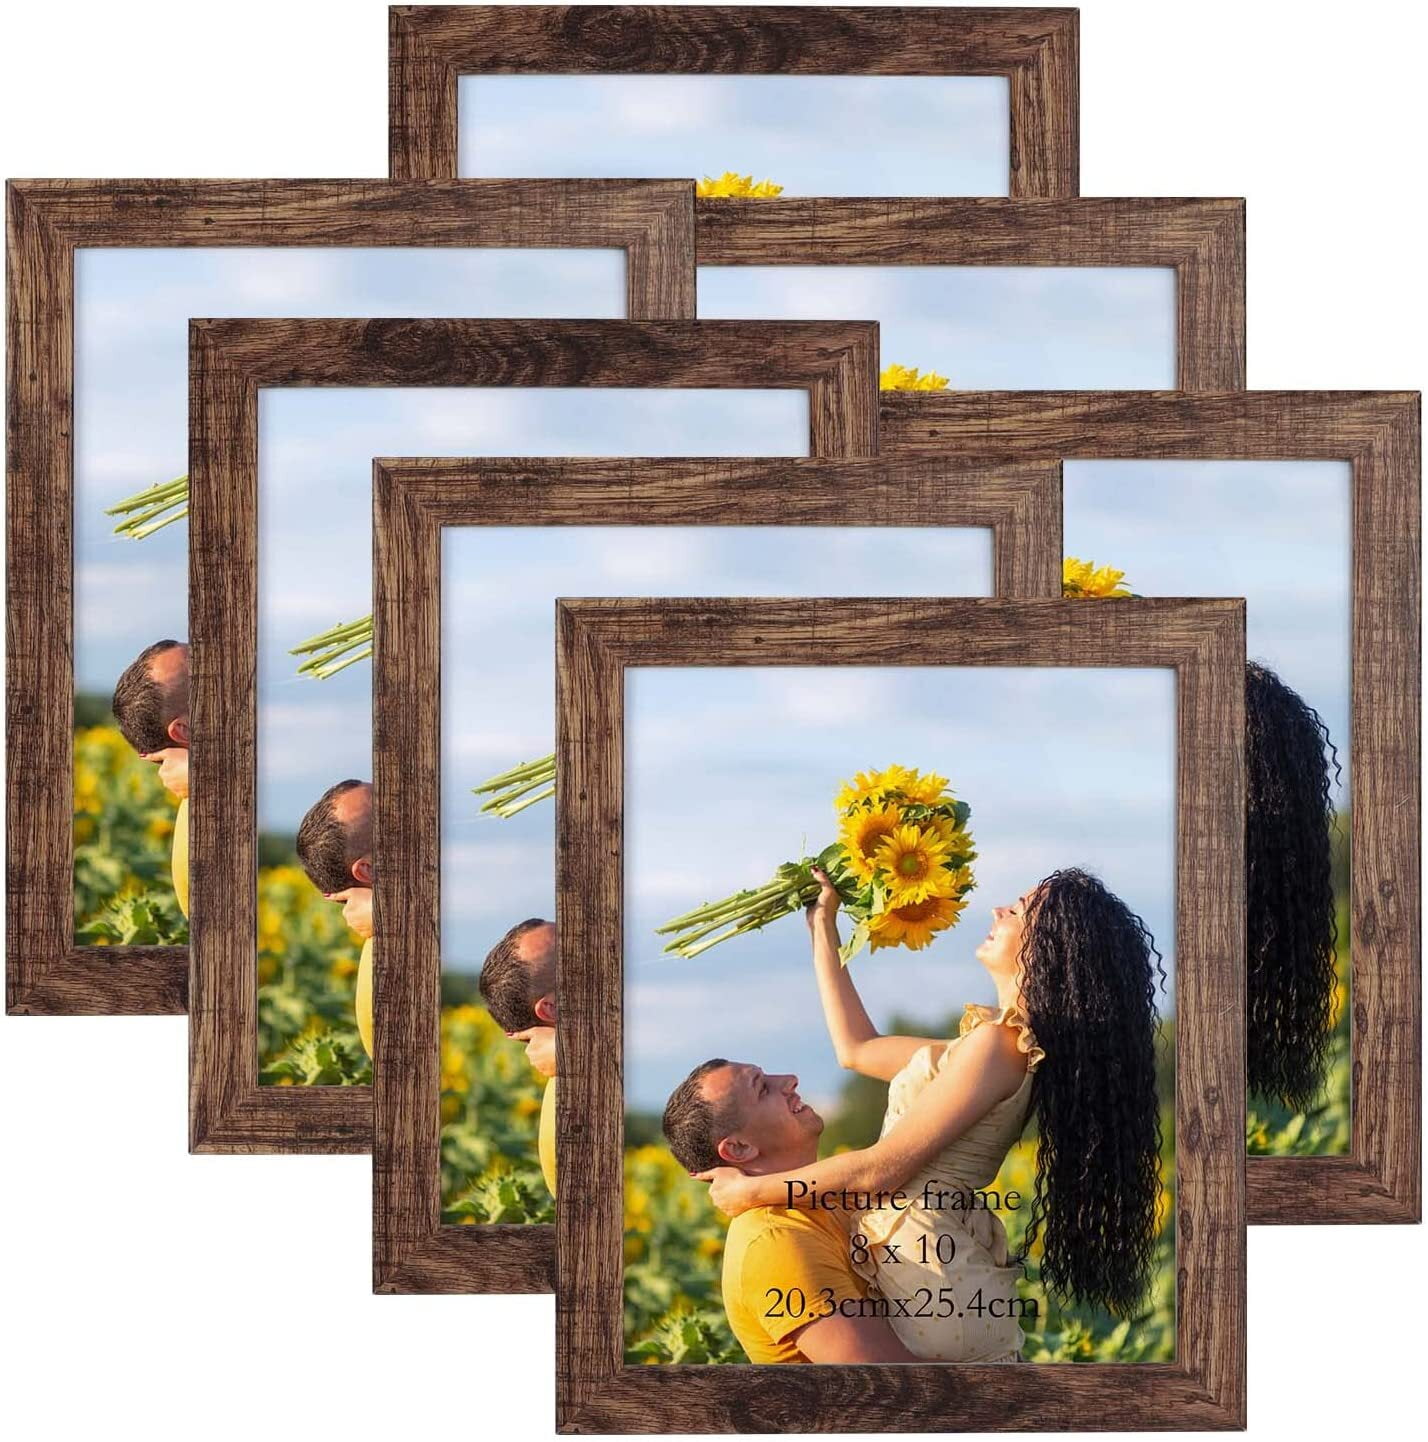  Giftgarden 4x6 Picture Frame Black Photo Frames Bulk for Wall  or Tabletop, Set of 12